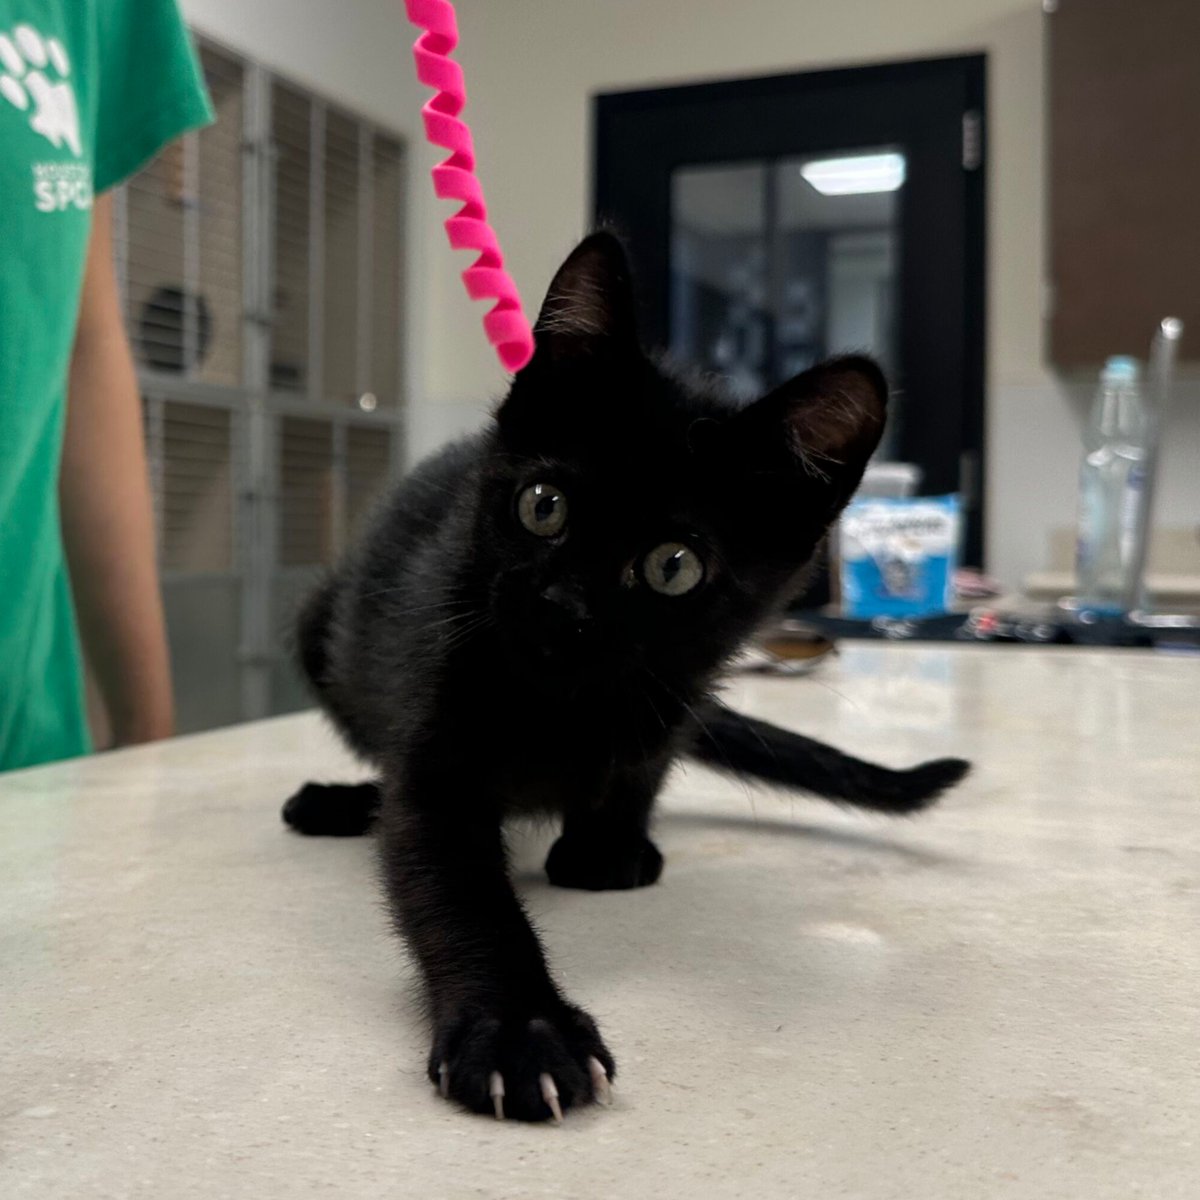 Meet Magic, a tripaw kitten rescued by a Good Samaritan after she was found limping. Our veterinary team amputated her leg to improve her quality of life. Still, Magic remains a loving and energetic kitten who loves to cuddle!

#AdoptMe #CatLovers #HoustonSPCA